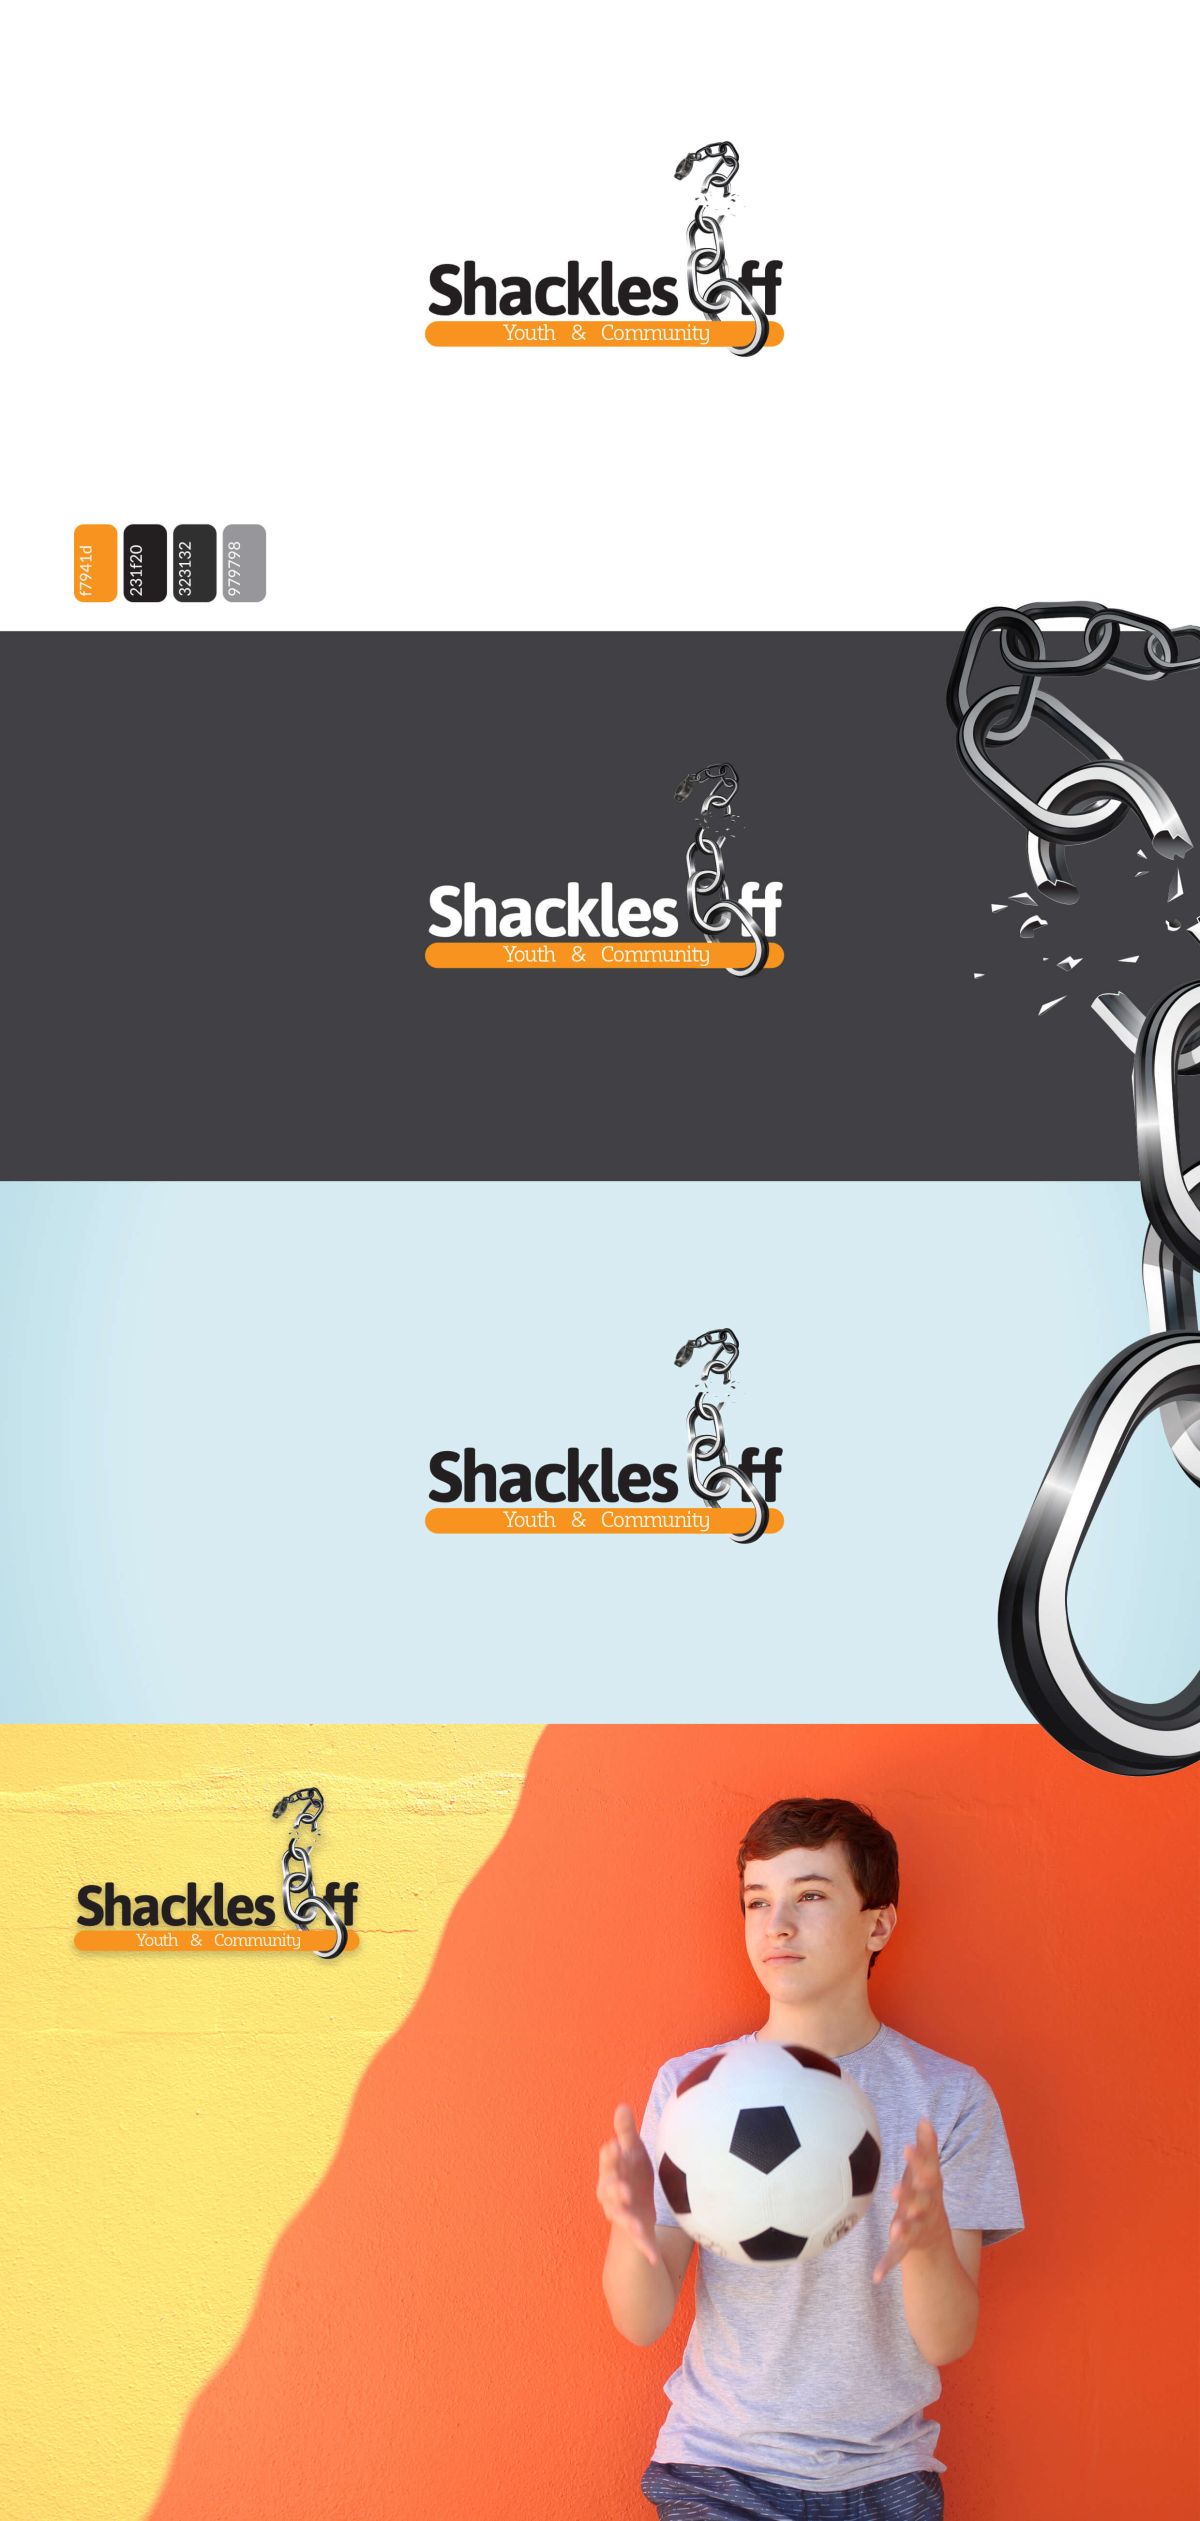 Shackles Off Youth Project Brand Identity